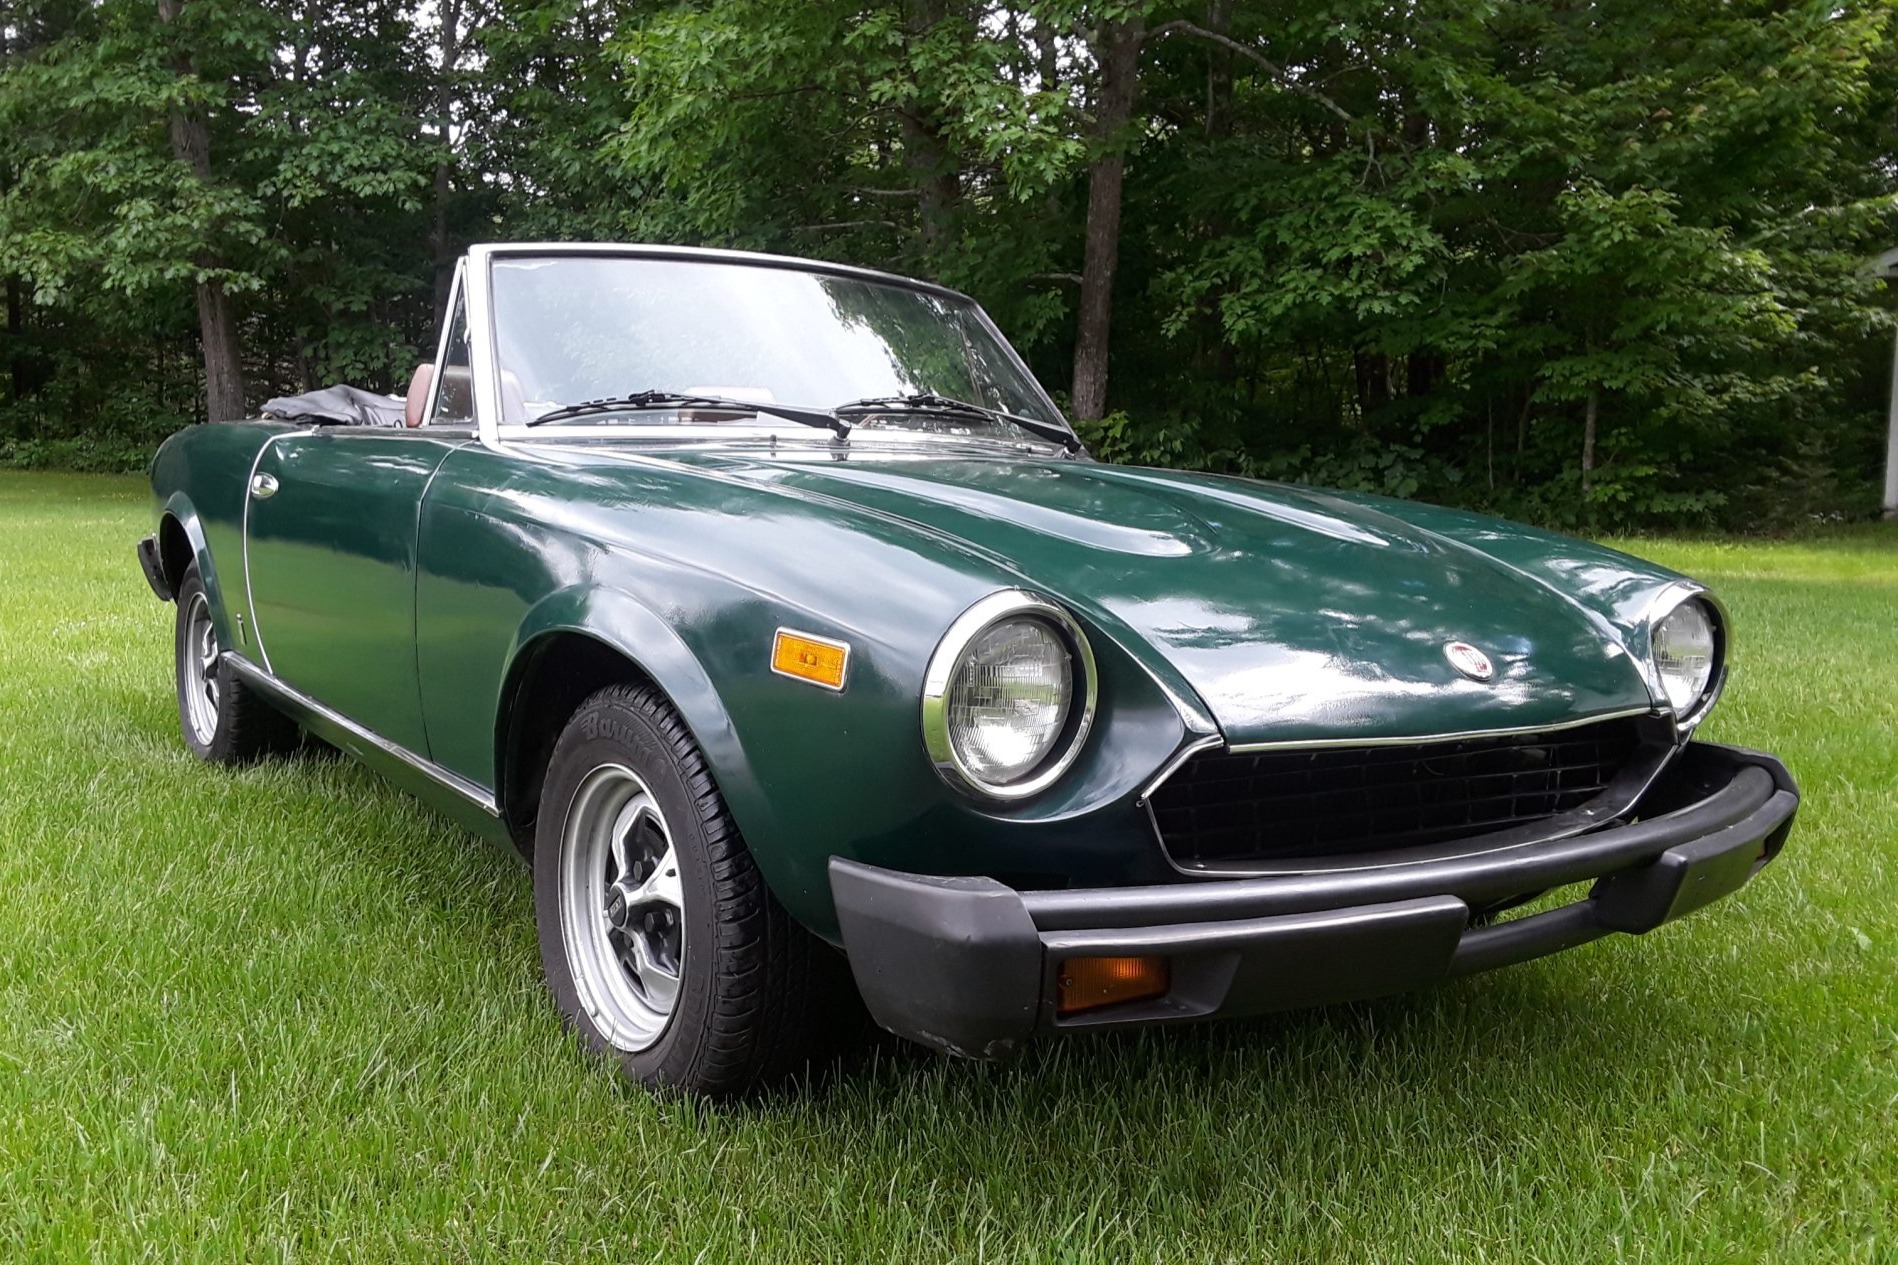 Used 1979 Fiat Spider 2000 5-Speed Review